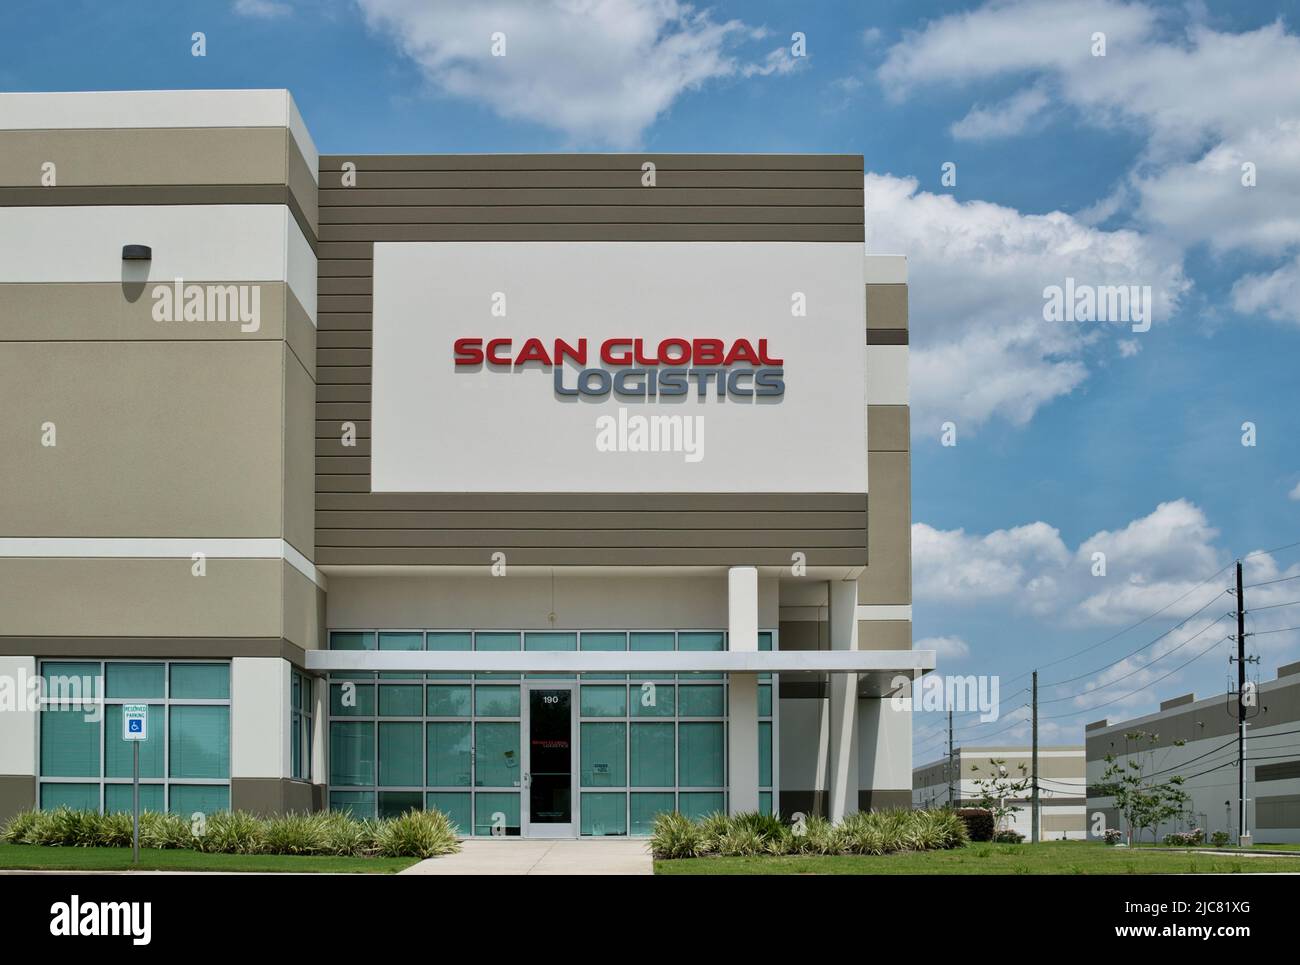 Houston, Texas USA 06-05-2022: Scan Global Logistics business storefront and main entrance in Houston TX. Freight forwarding company founded in 2007. Stock Photo